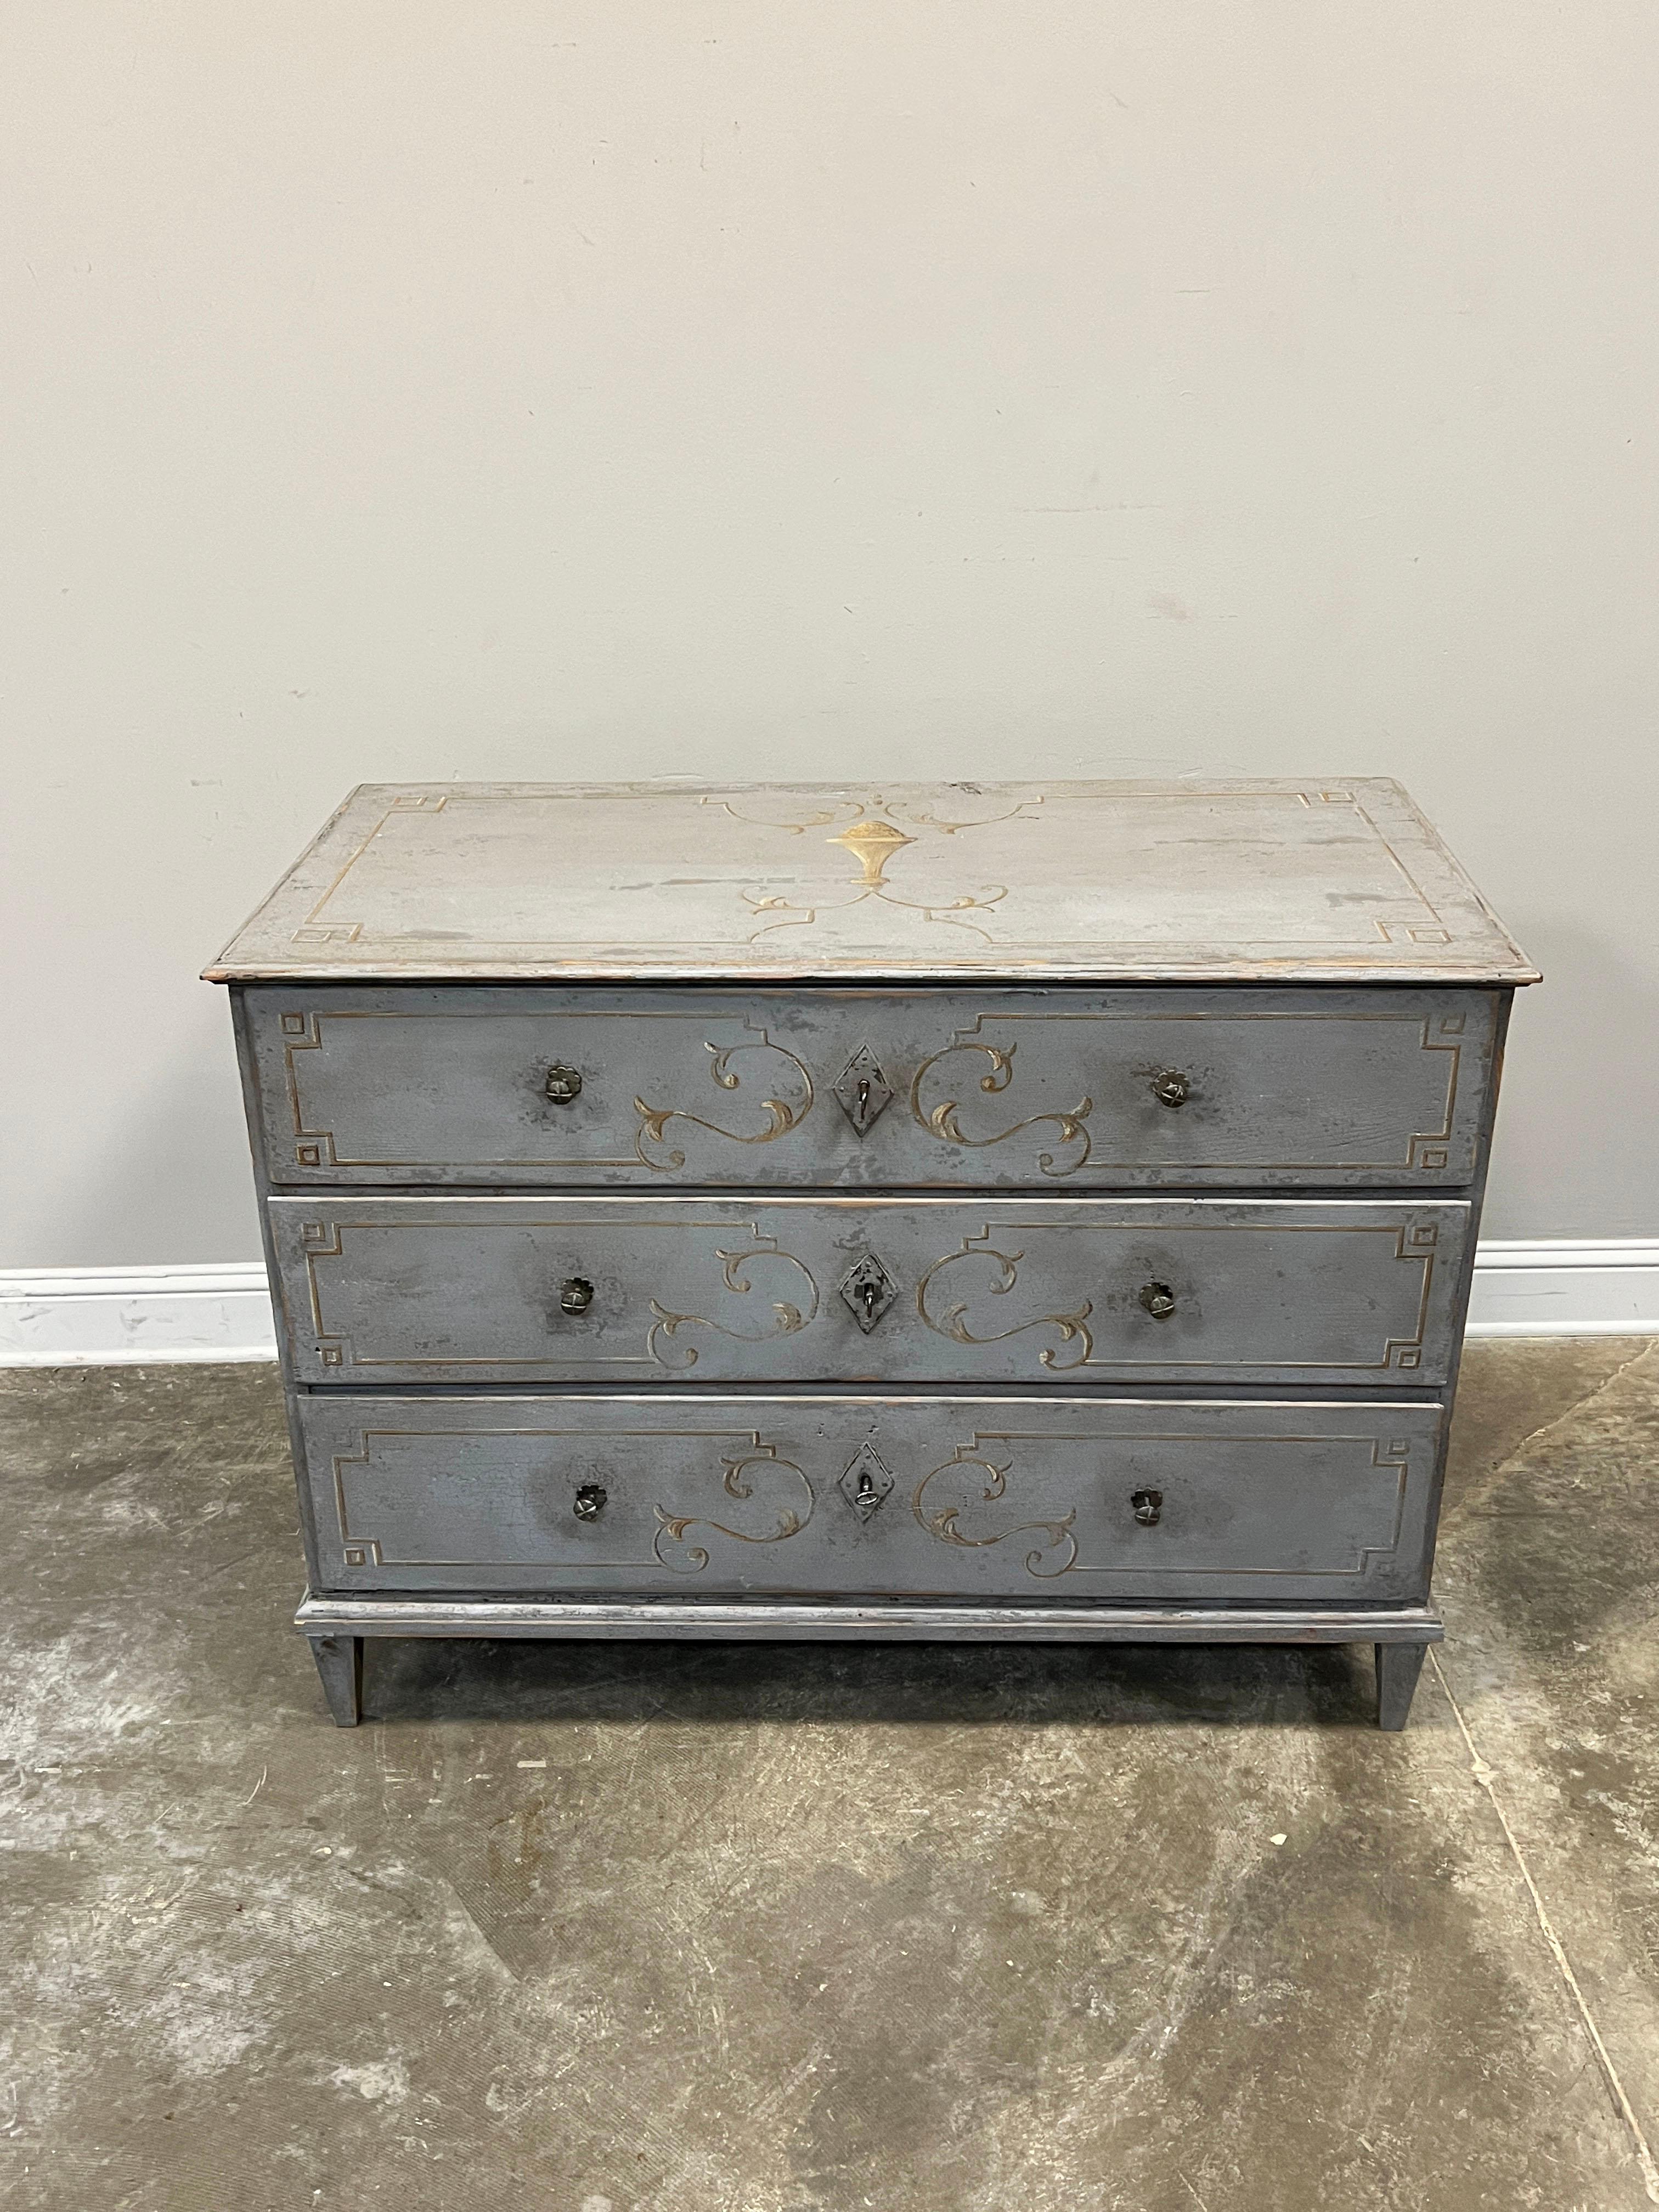 Generous sized mid 19th century chest of drawers beautifully painted in a soft blue-gray accented with delicate neo-classic design overpainted on the three drawers, sides and top. The base of the chest is straight and finished with molding and rests